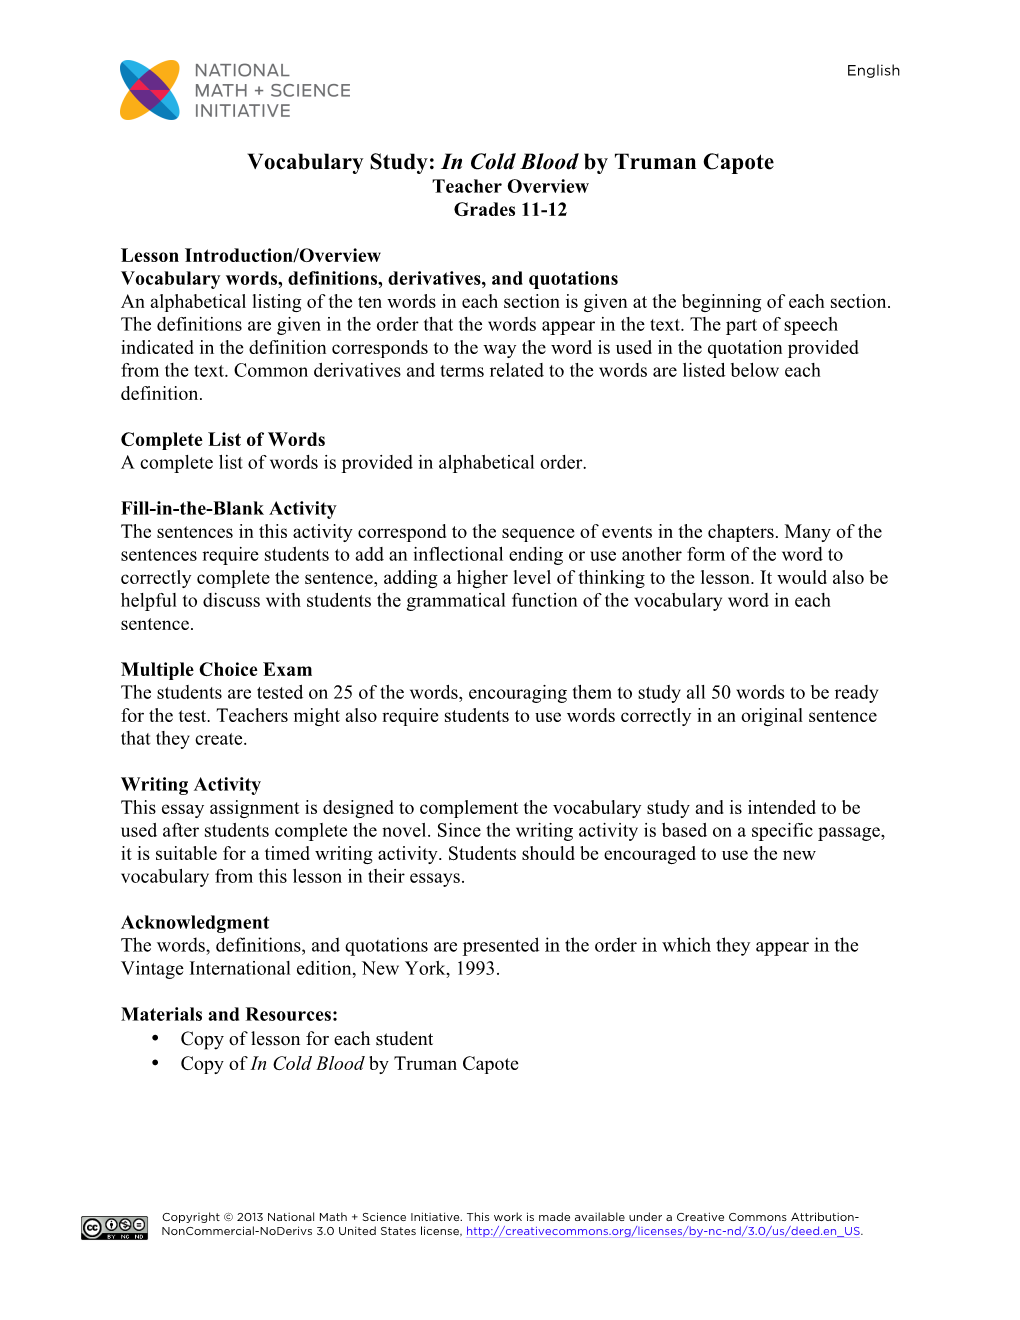 Vocabulary Study: in Cold Blood by Truman Capote Teacher Overview Grades 11-12